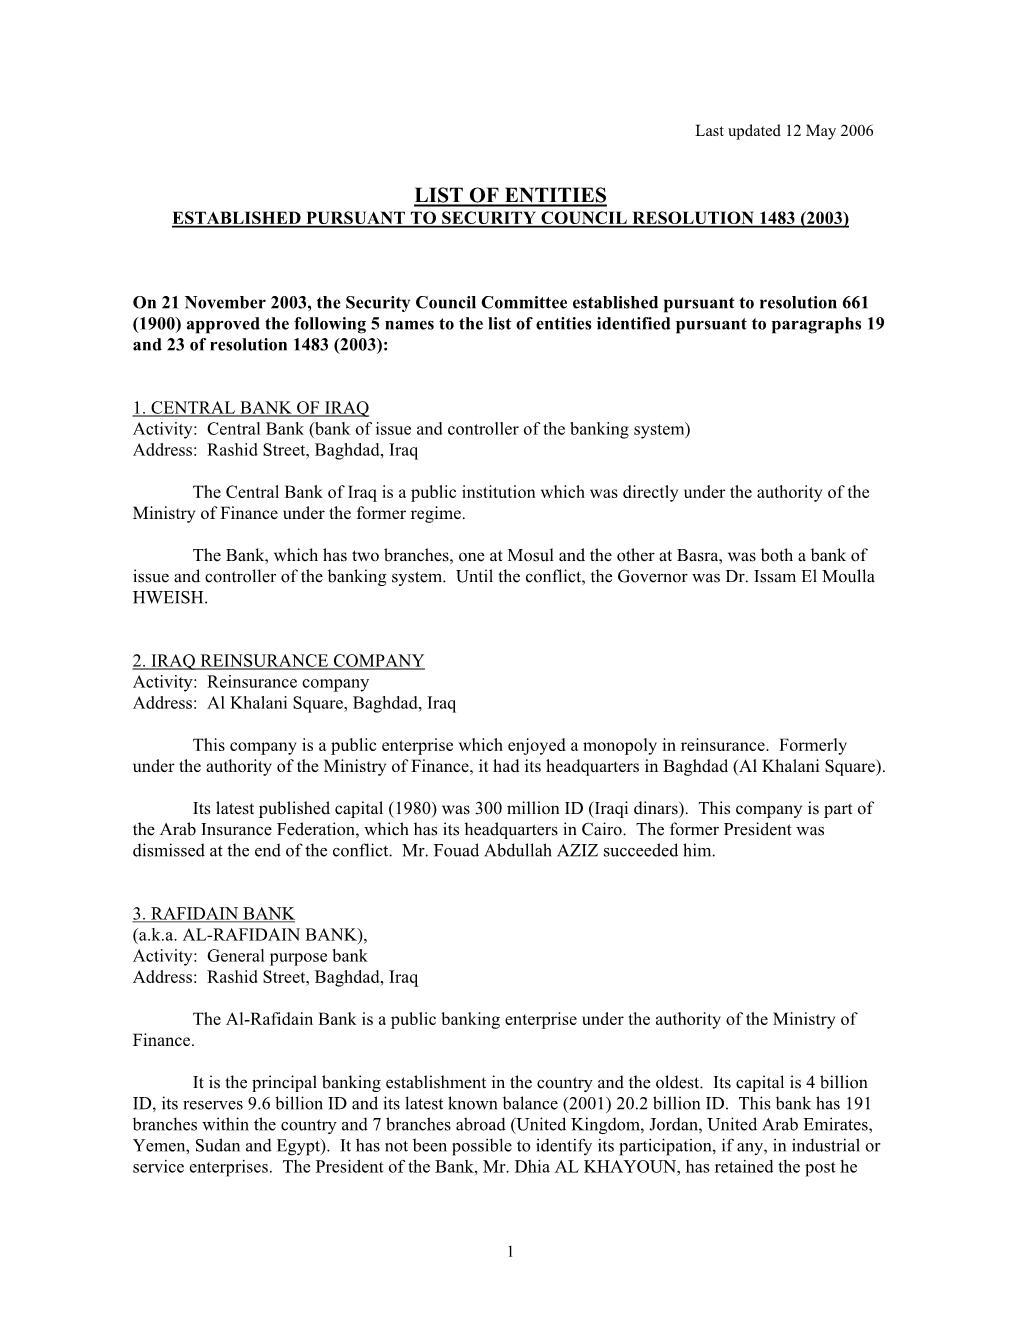 List of Entities Established Pursuant to Security Council Resolution 1483 (2003)